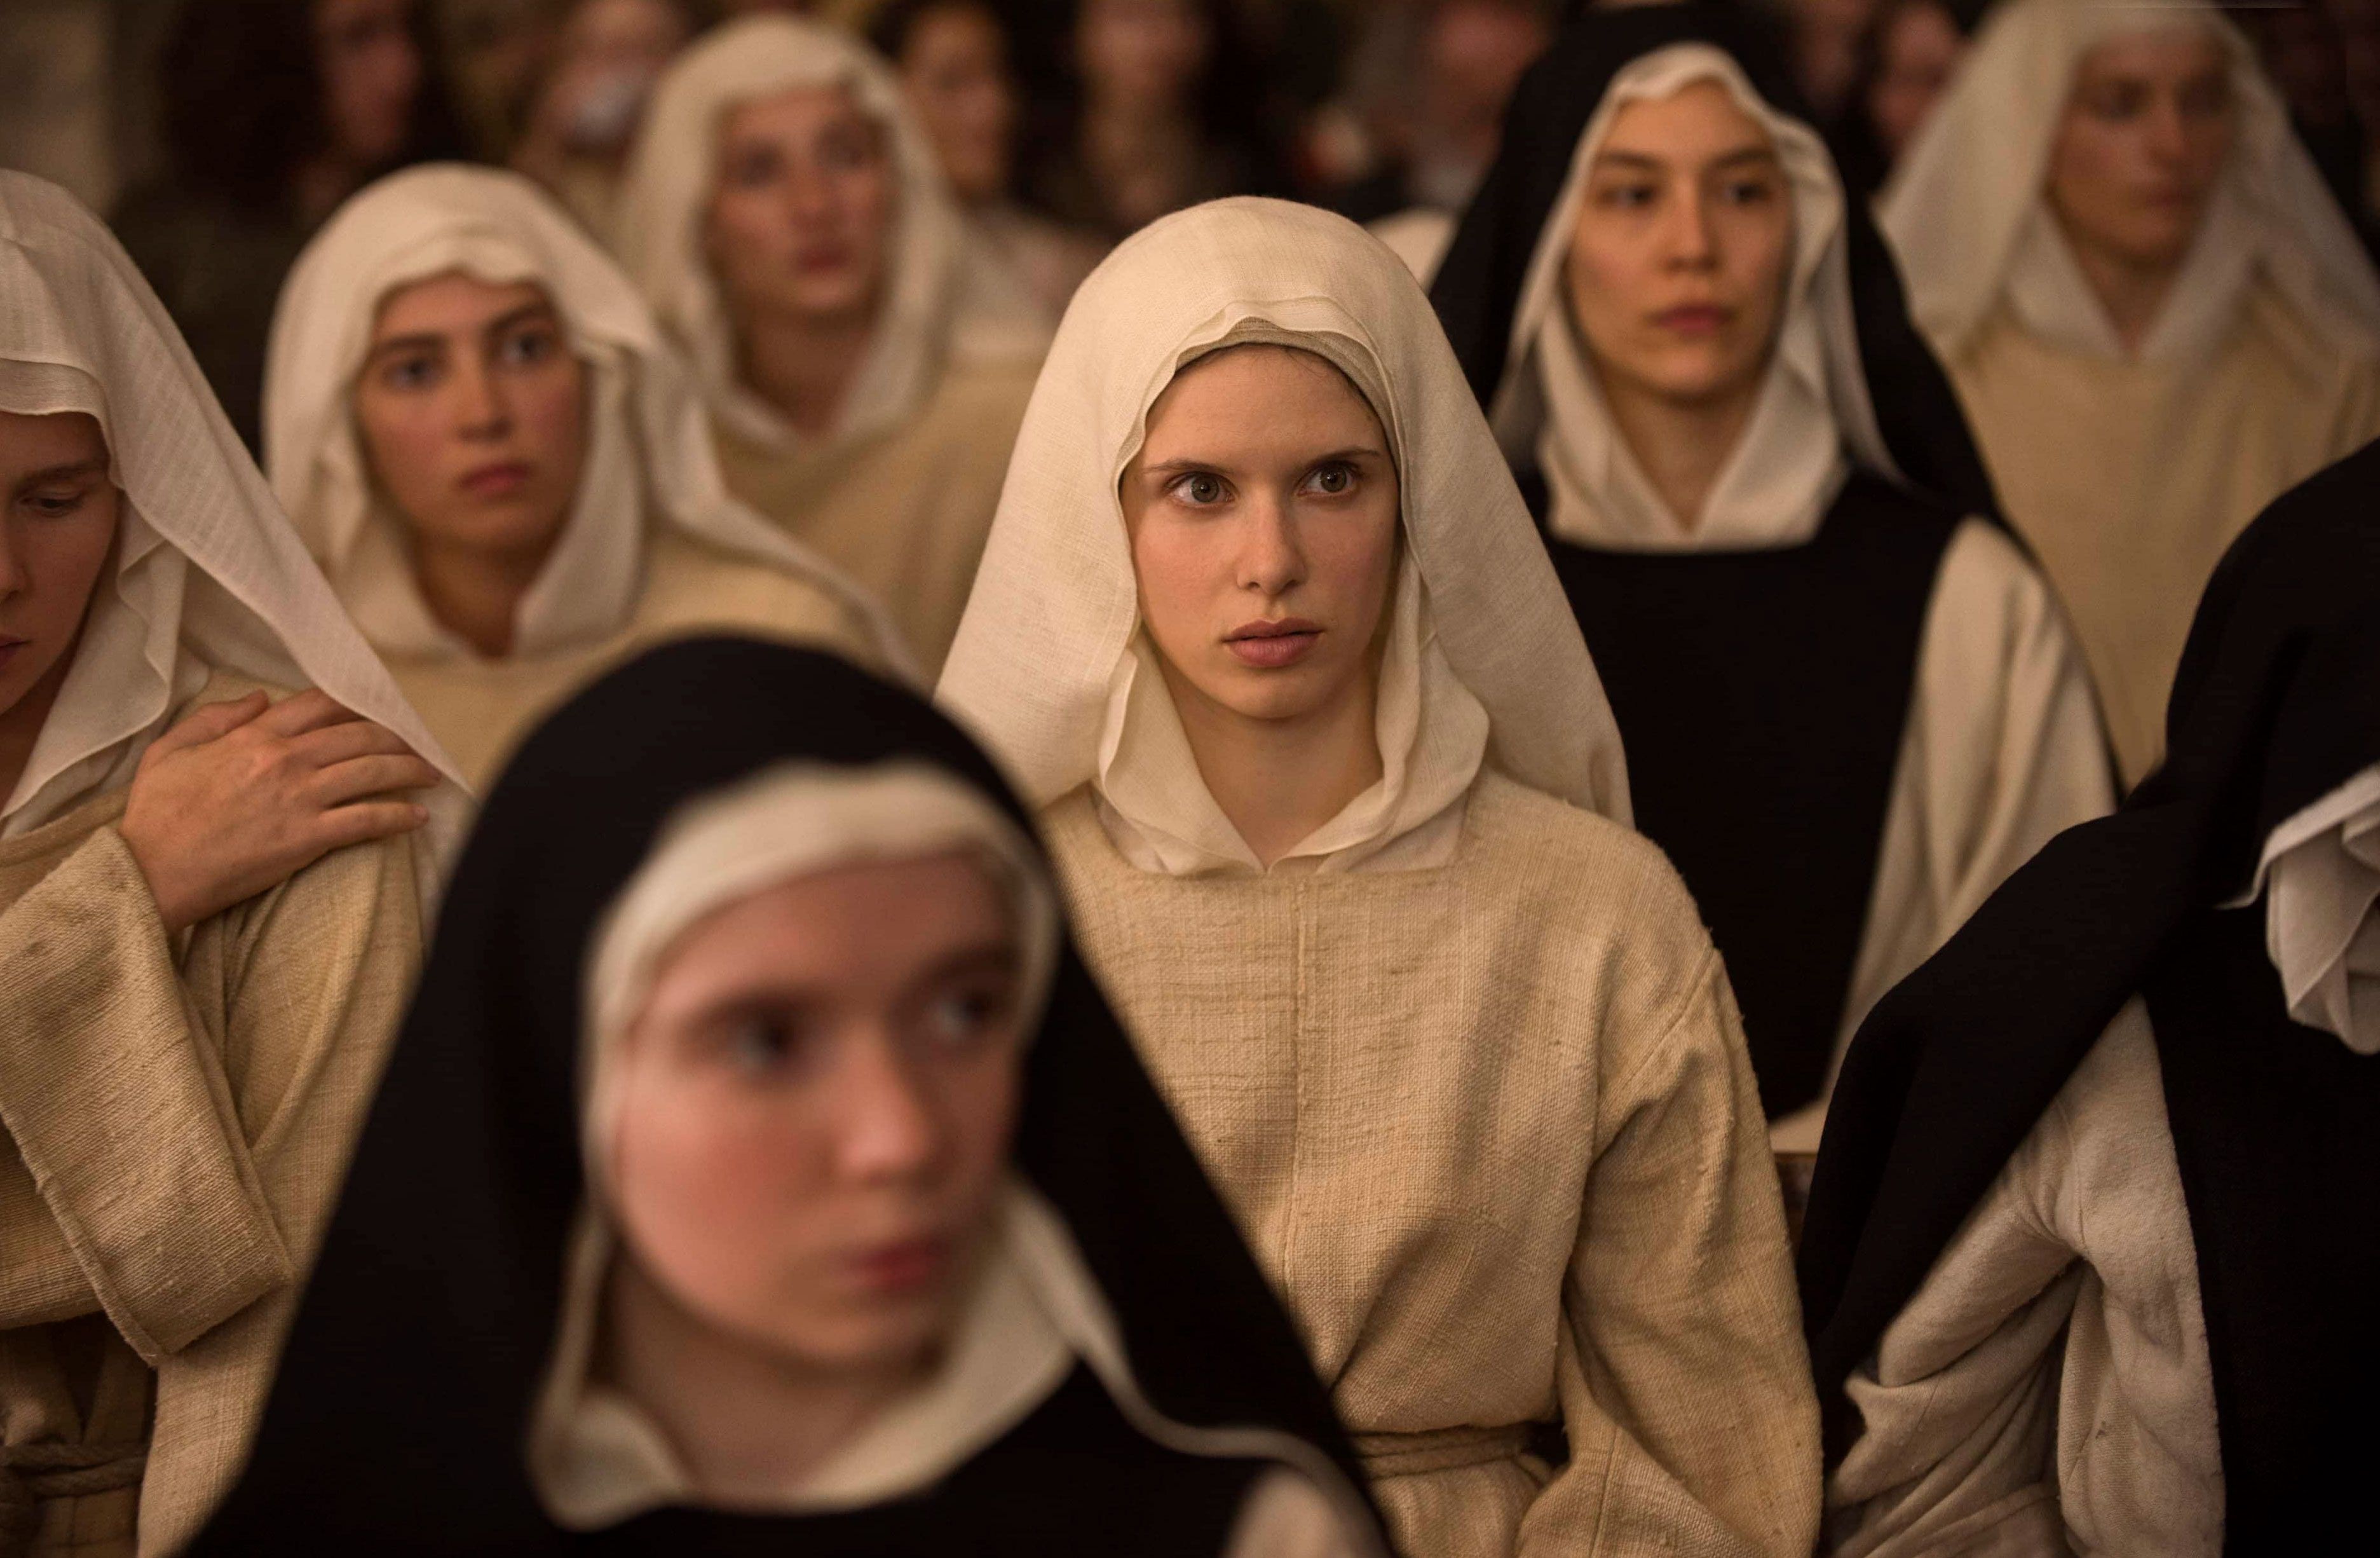 Wildest Moments from the Nunsploitation Movie Benedetta picture pic